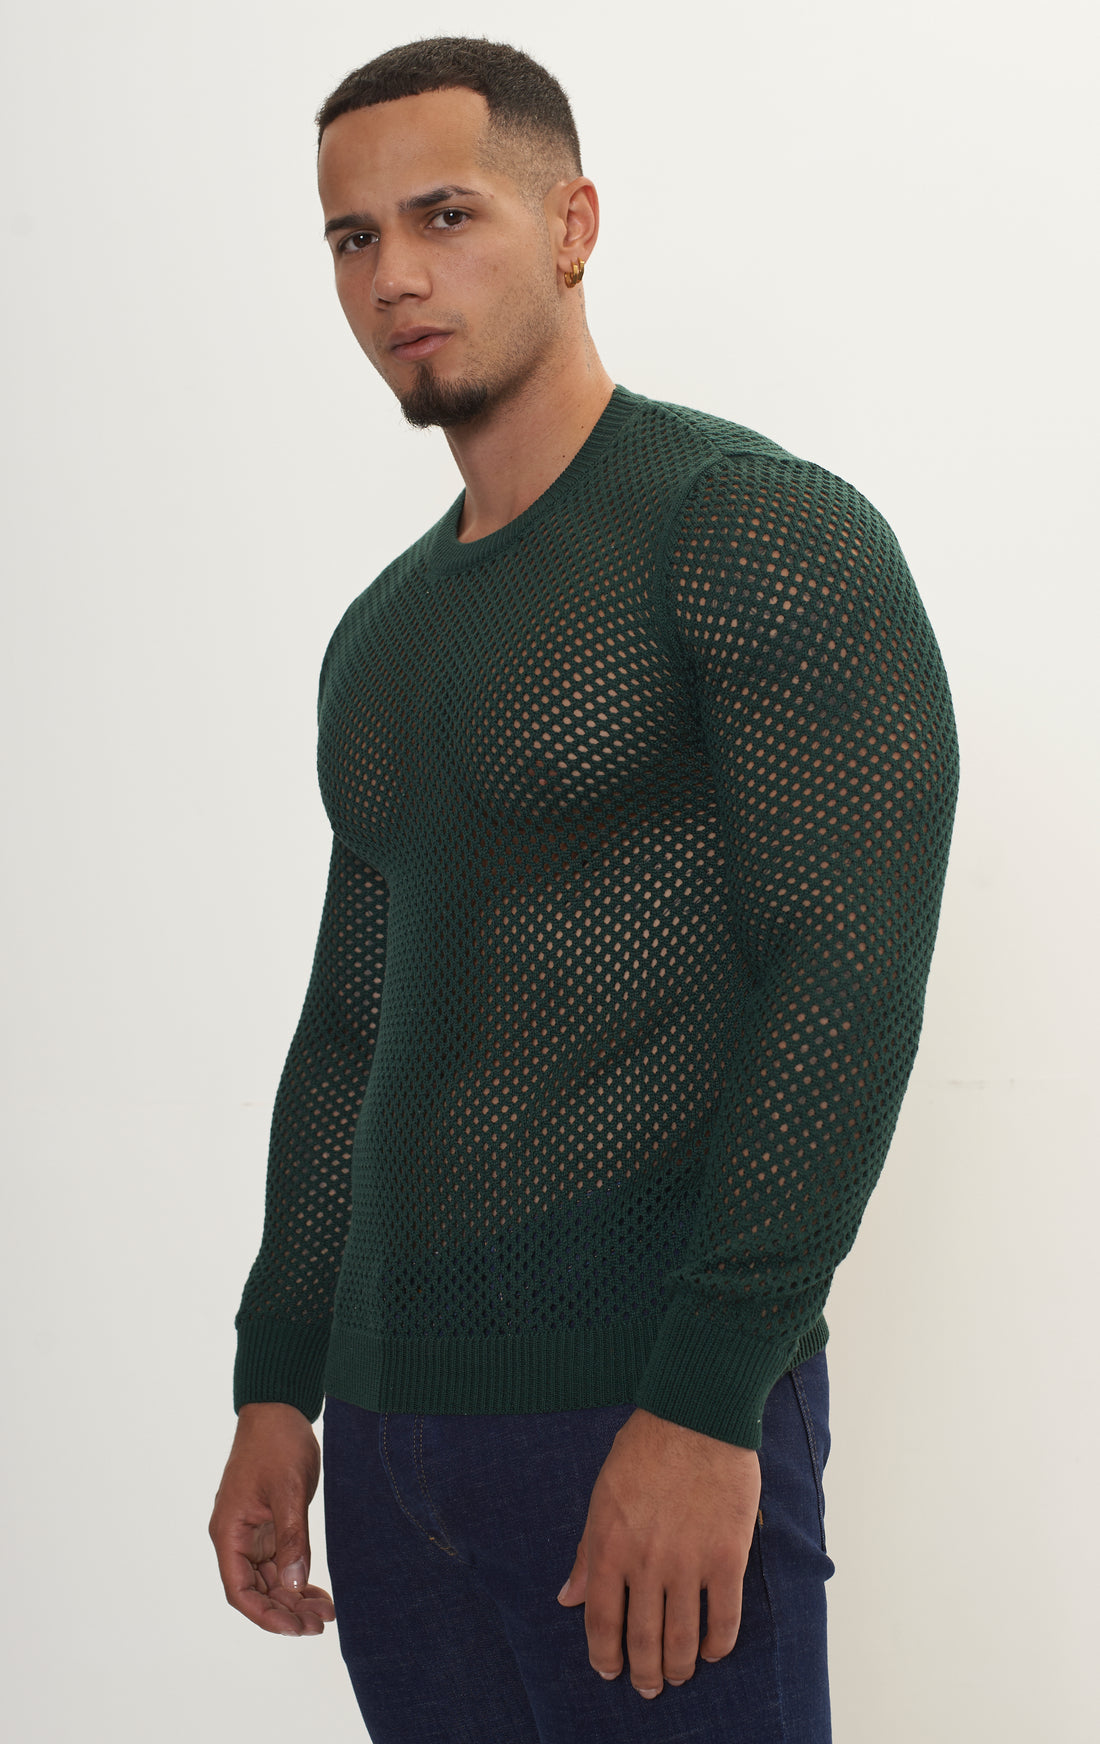 See Through Fishnet Muscle Fit Shirt - Green